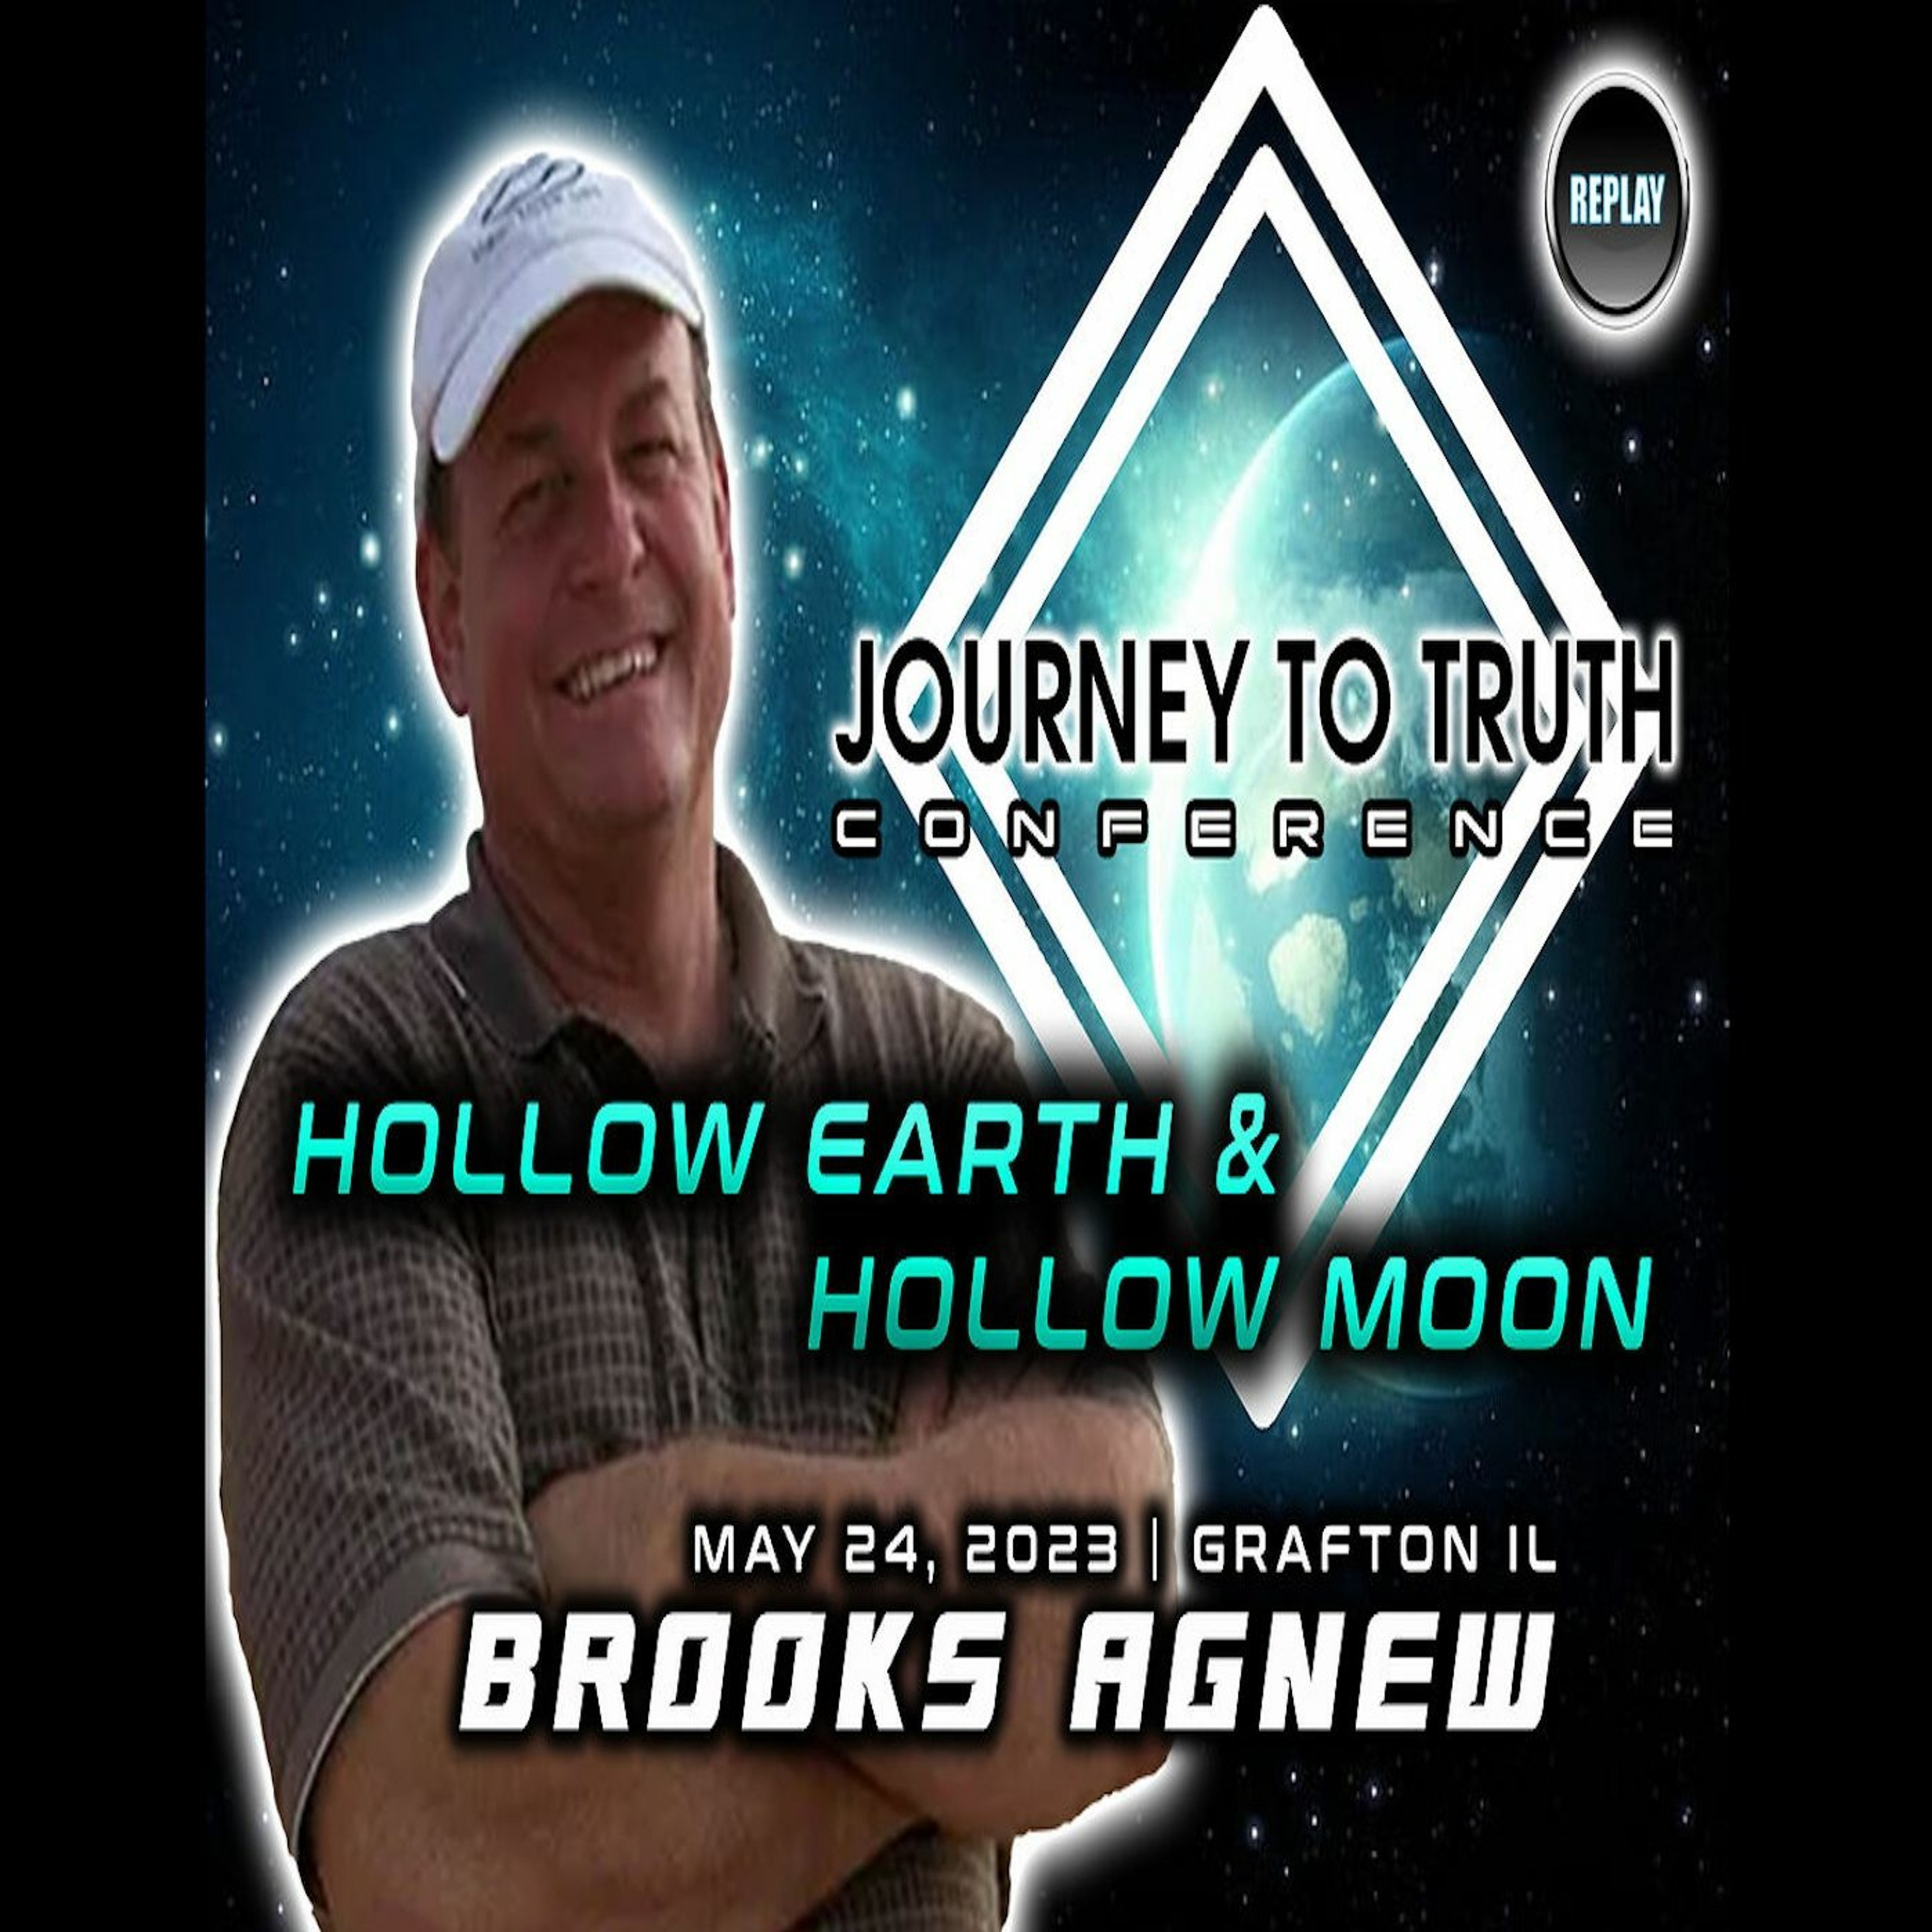 BROOKS AGNEW | HOLLOW EARTH & HOLLOW MOON | Journey To Truth Conference 2023